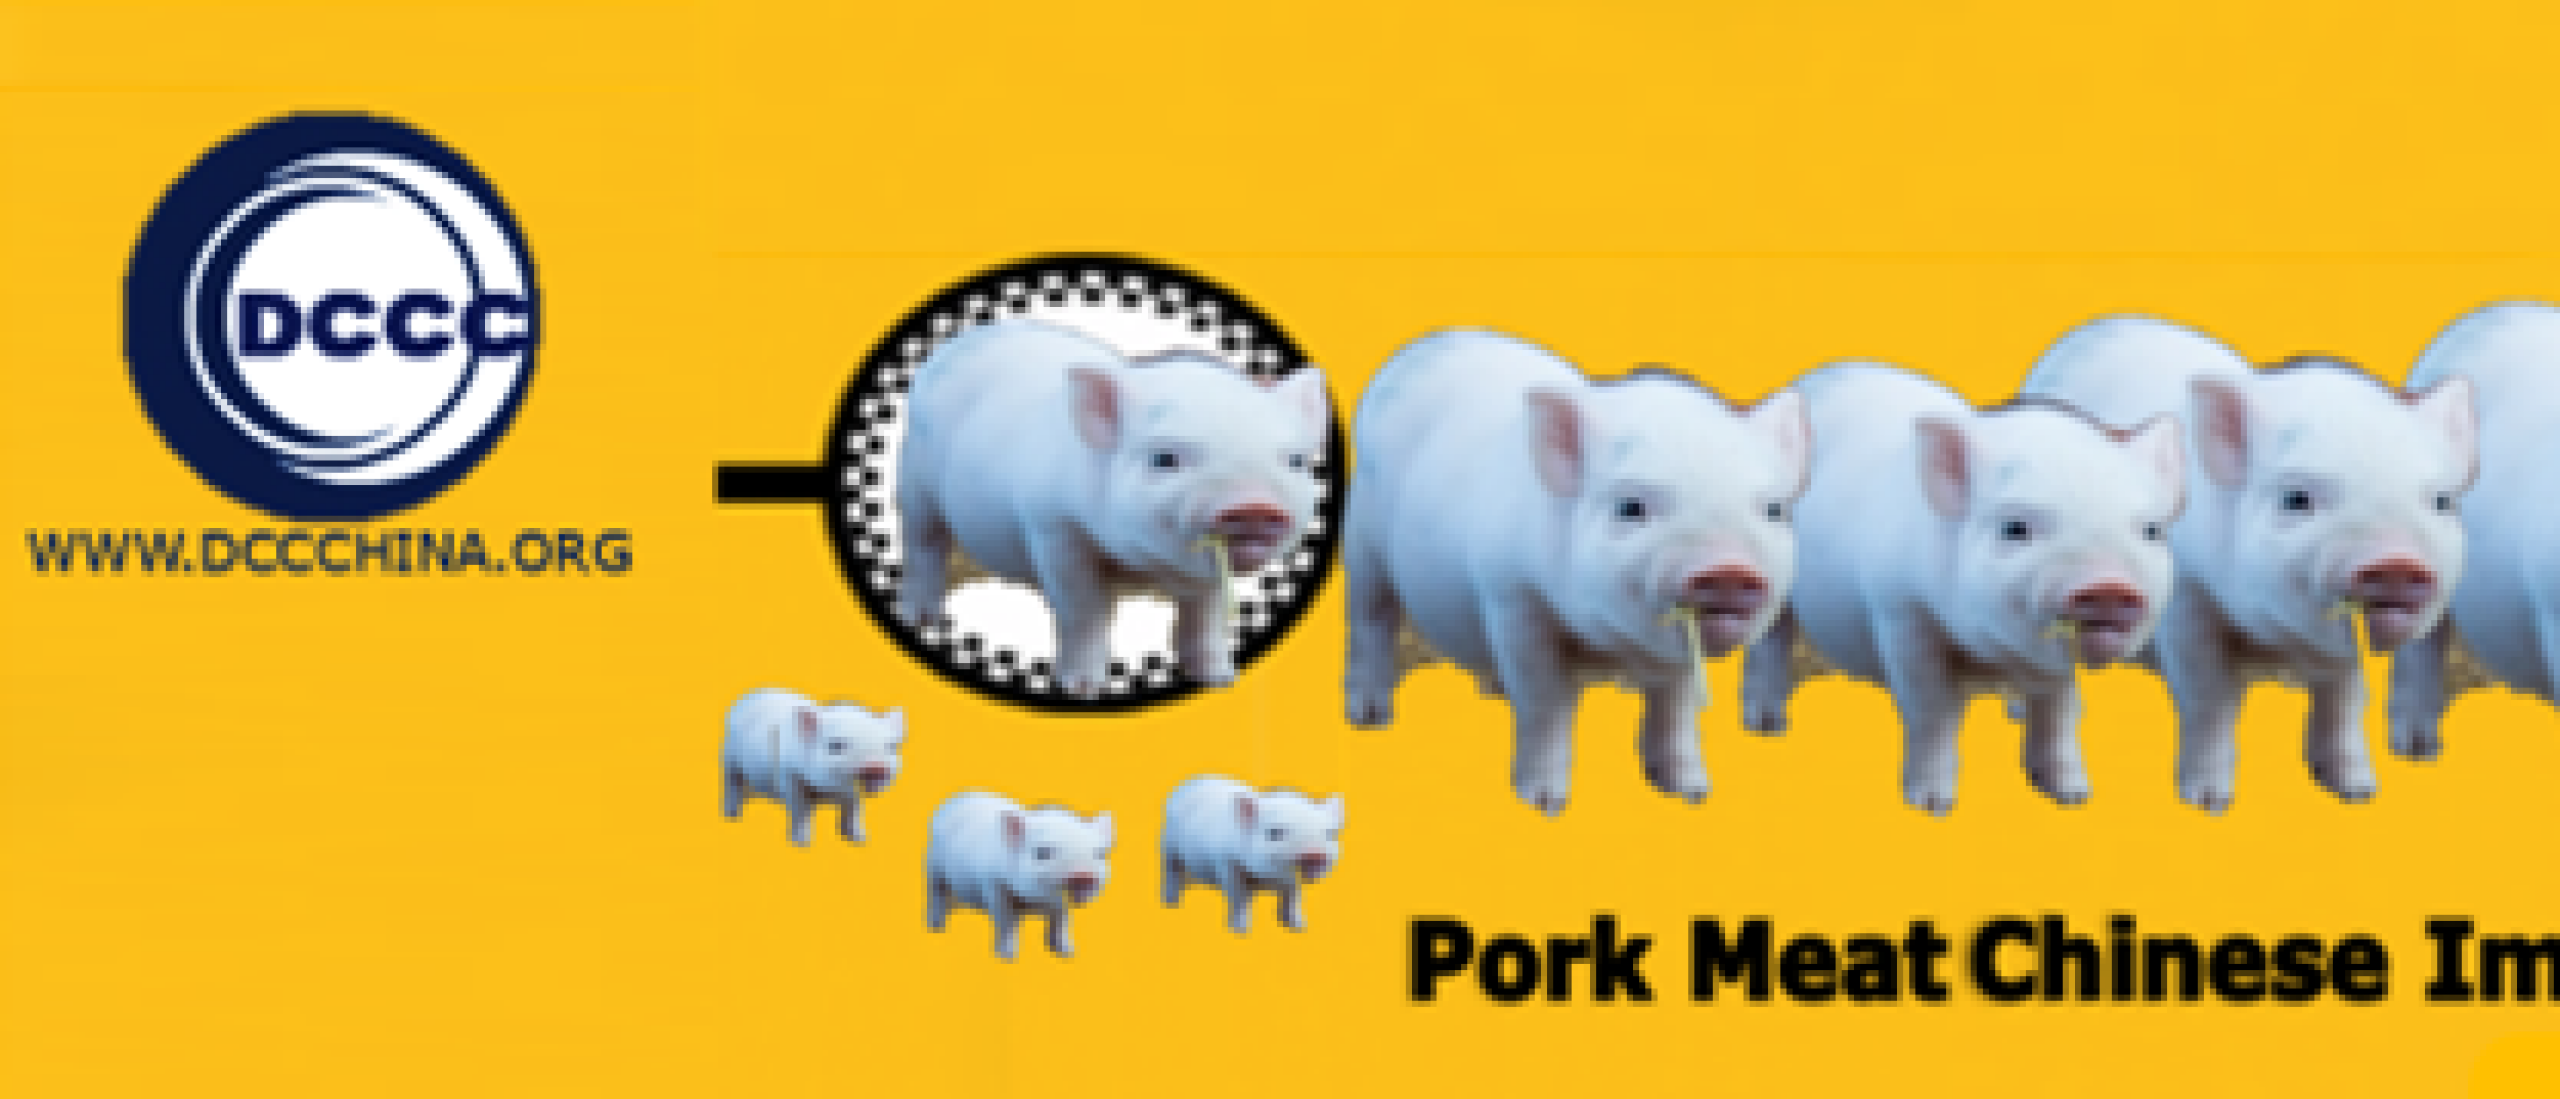 How works pork power in Chinese market - China pork imports professionals